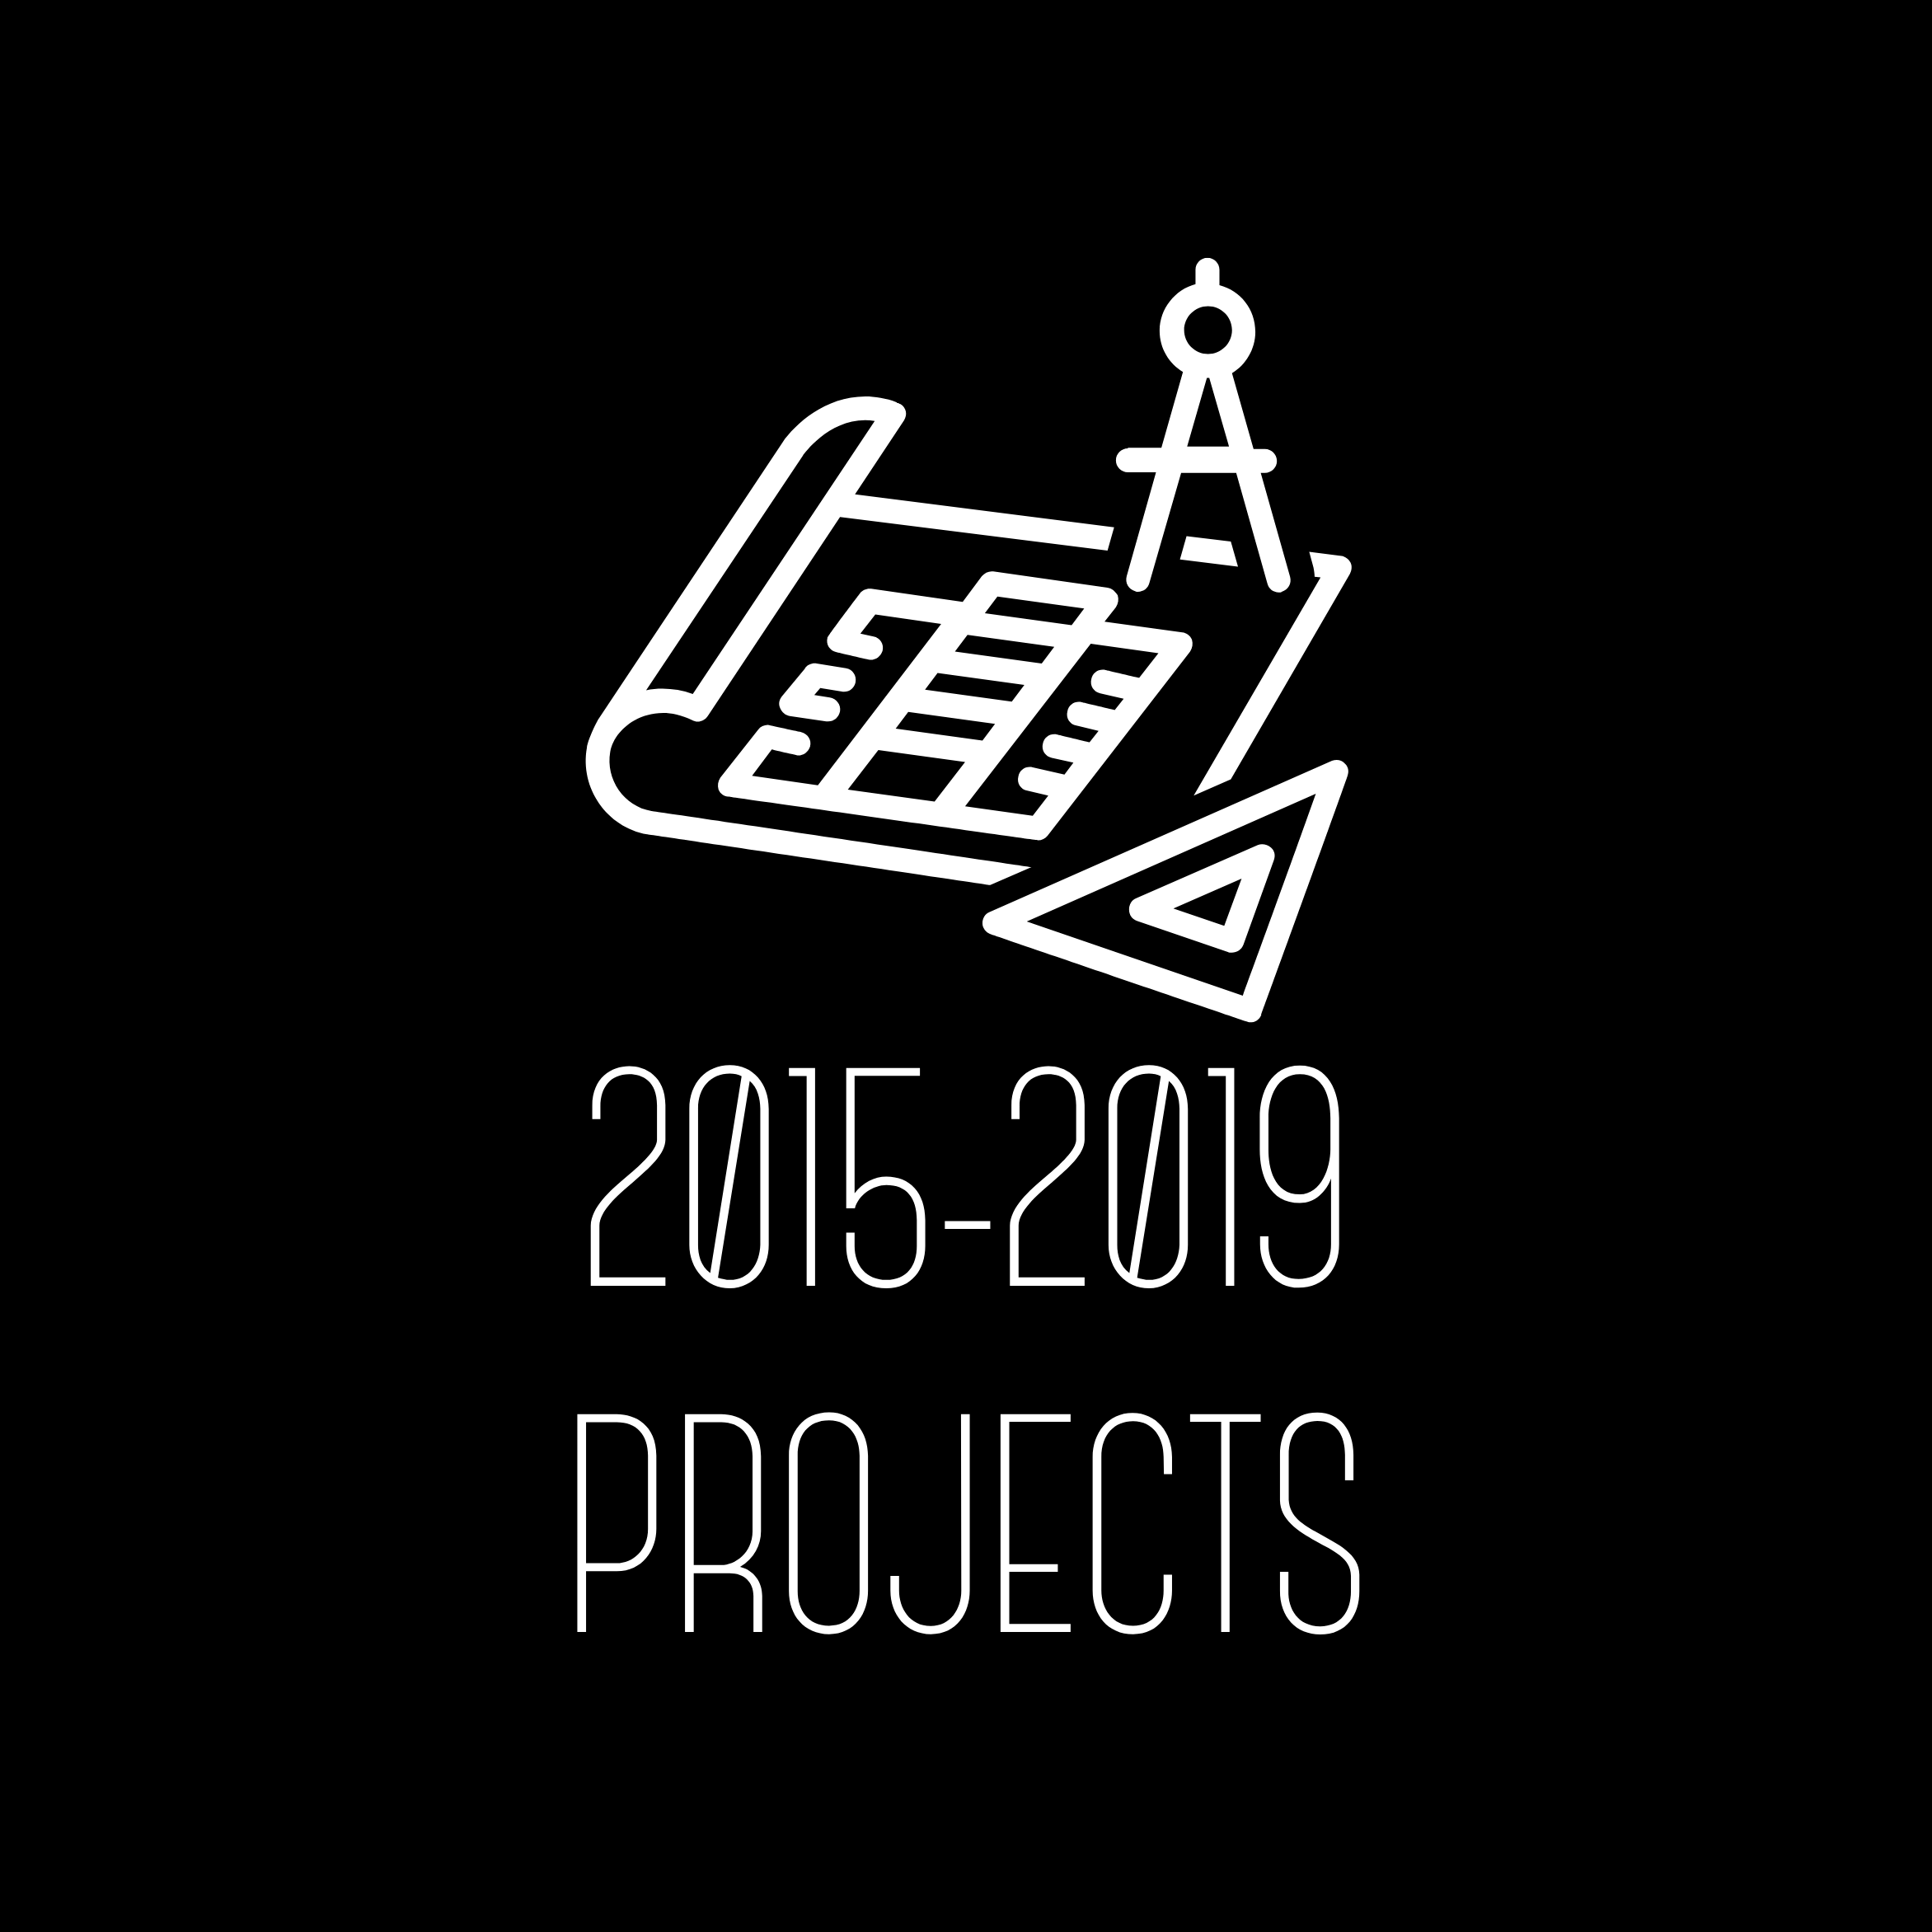 2015-2019 Projects